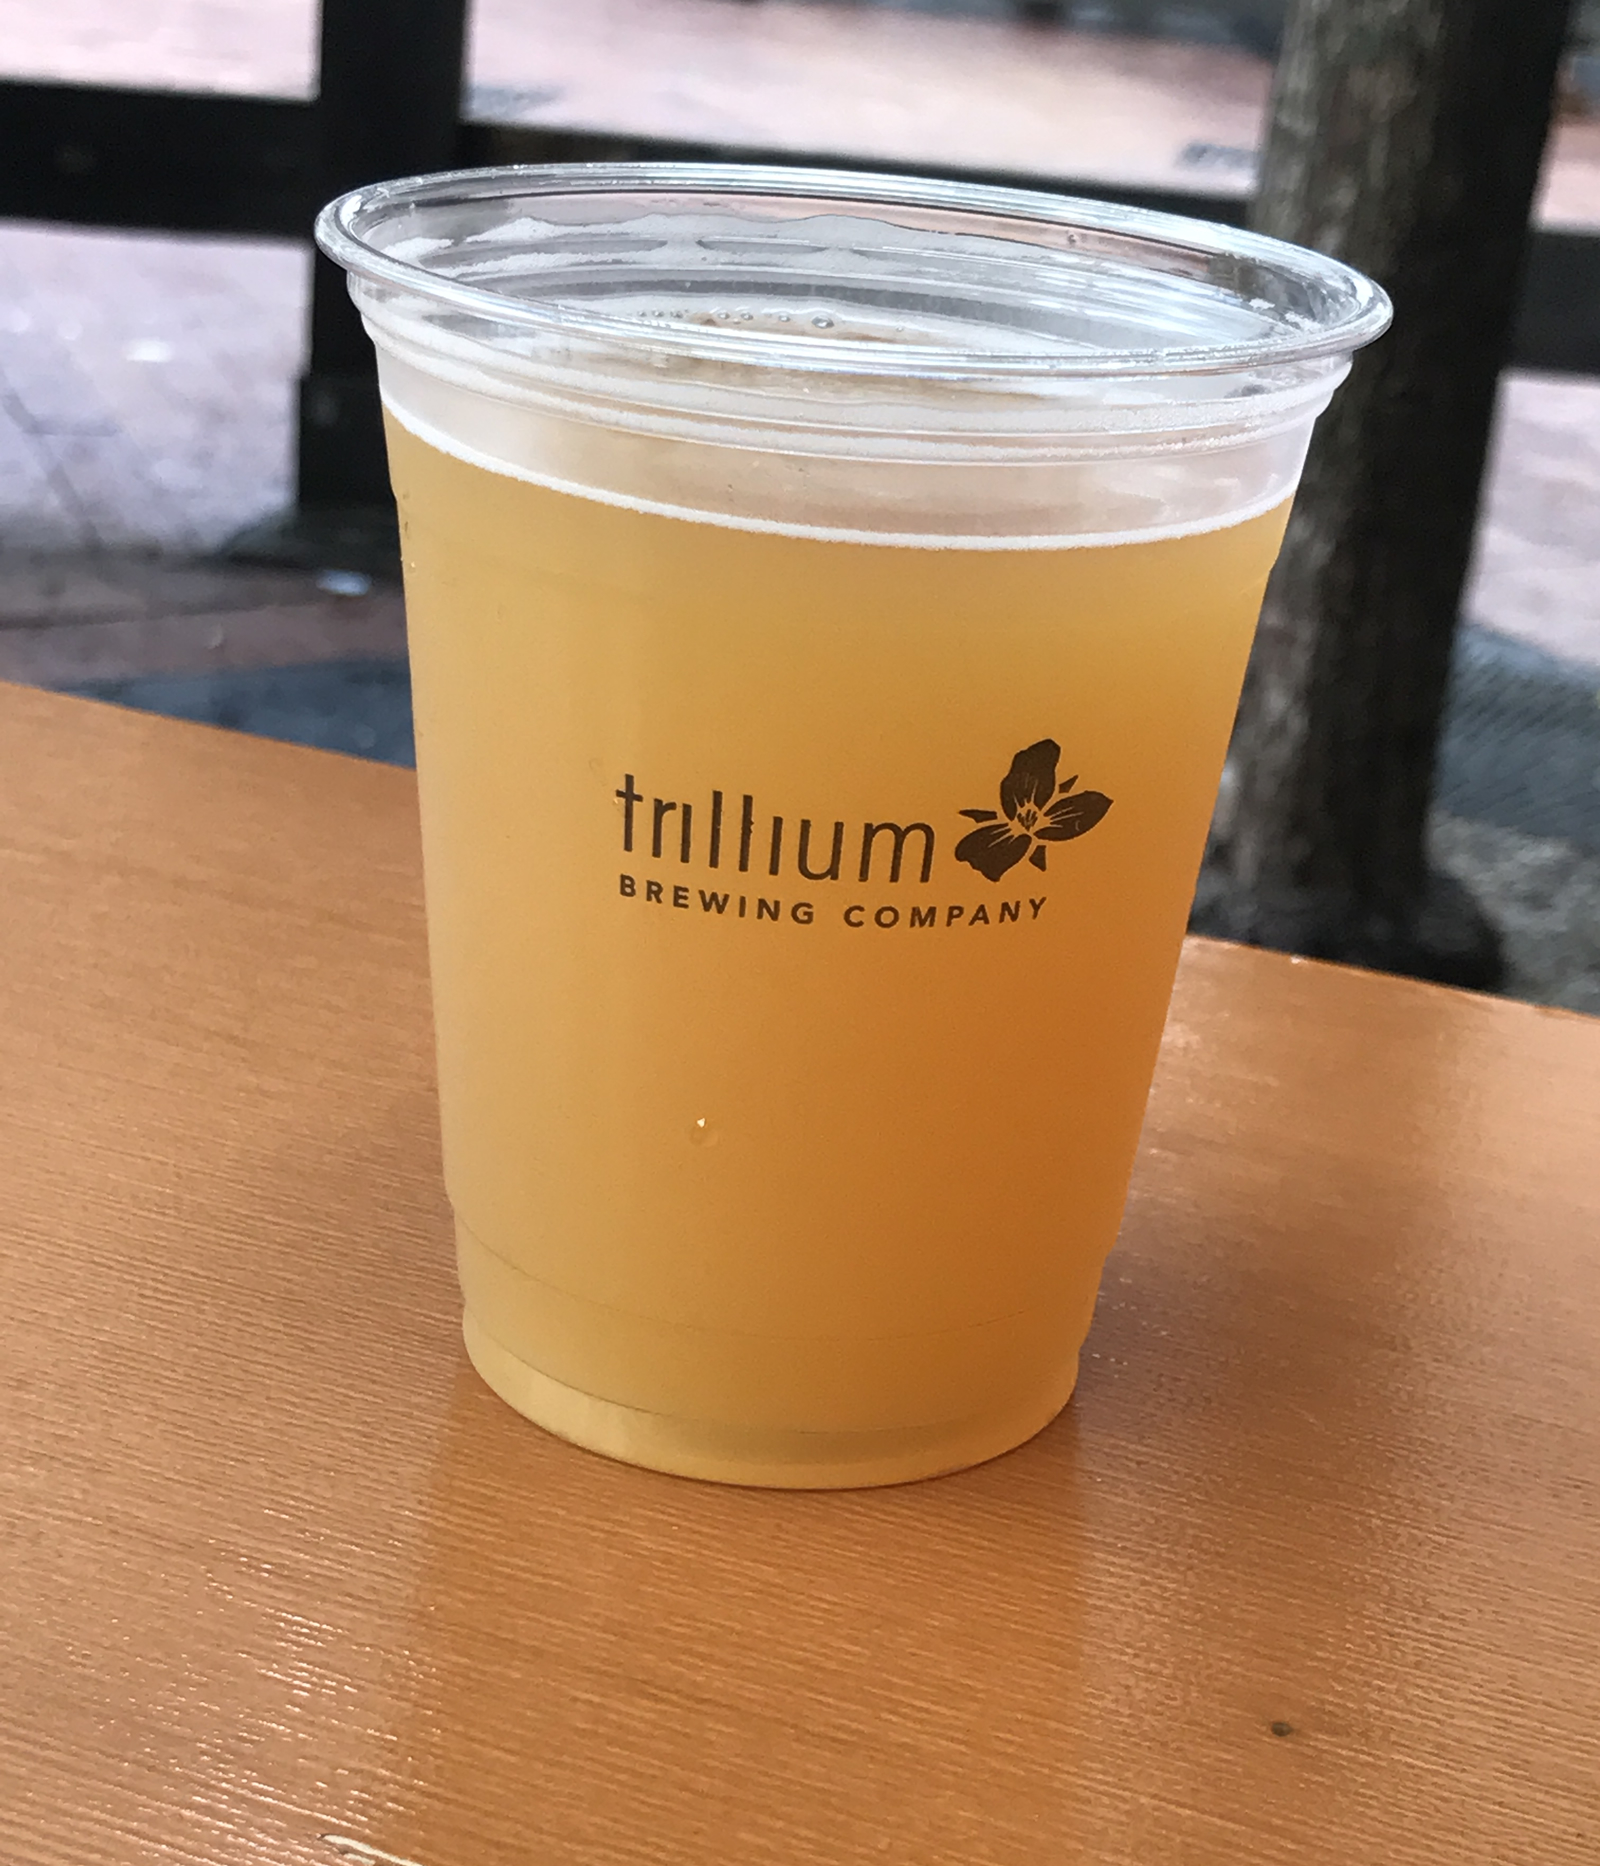 Trillium Brewing Company Beer in a Cup